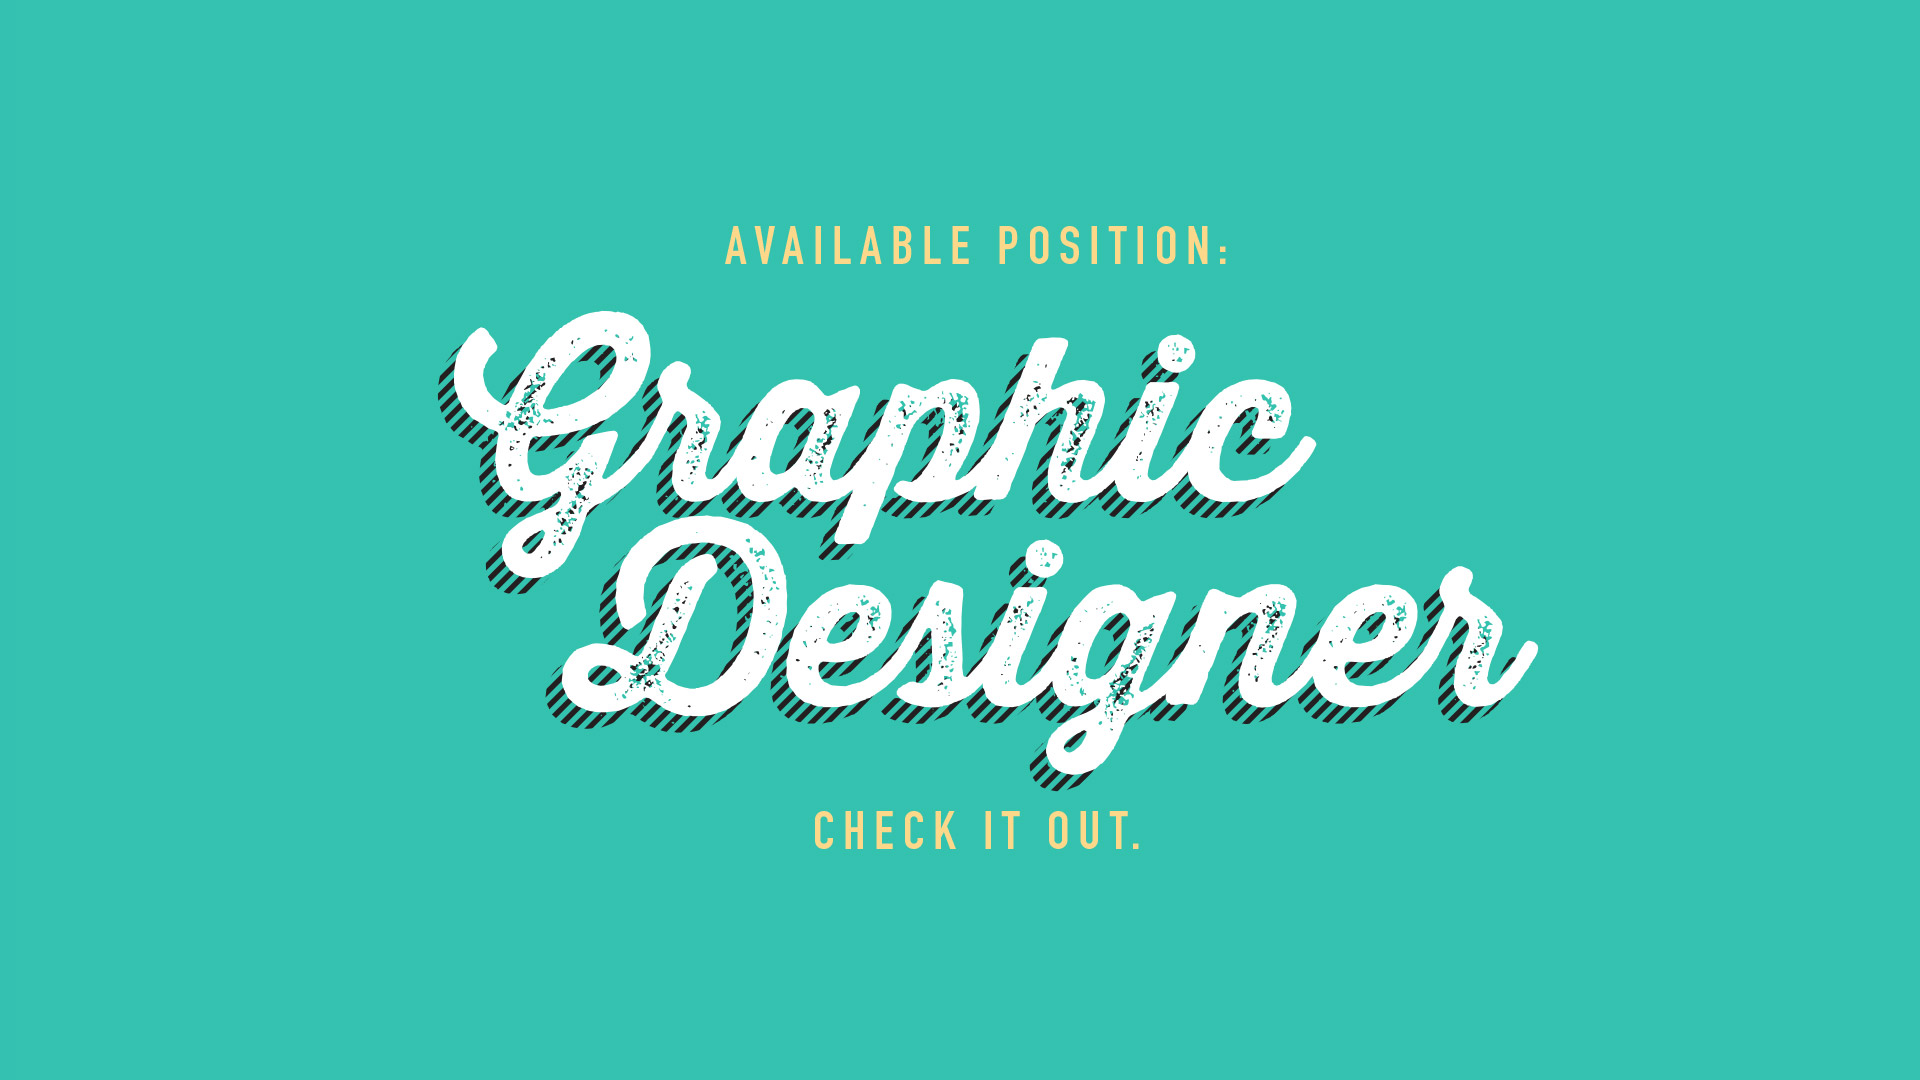 Available Position: Graphic Designer. Check it out.